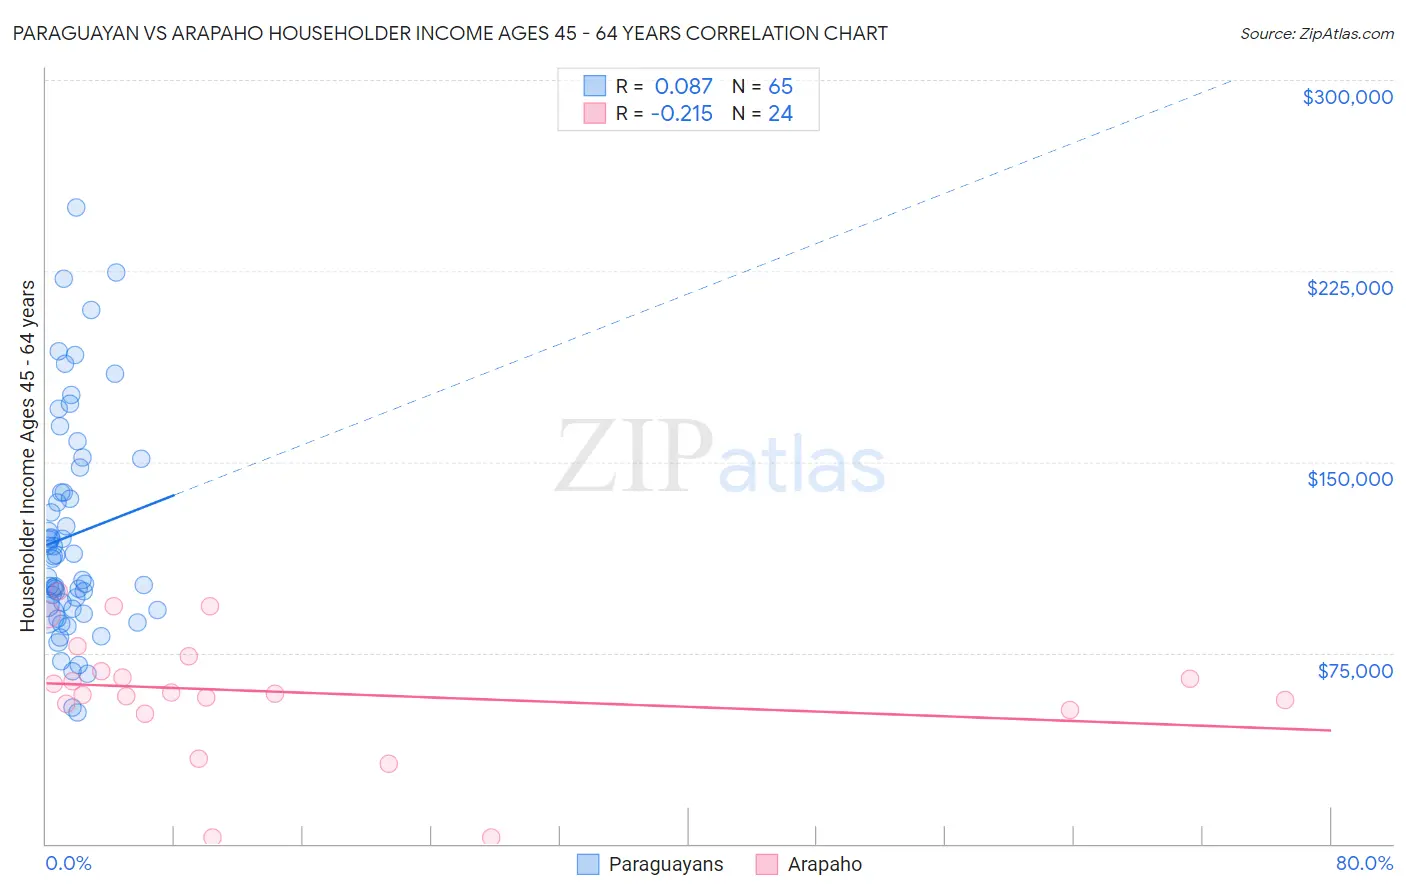 Paraguayan vs Arapaho Householder Income Ages 45 - 64 years